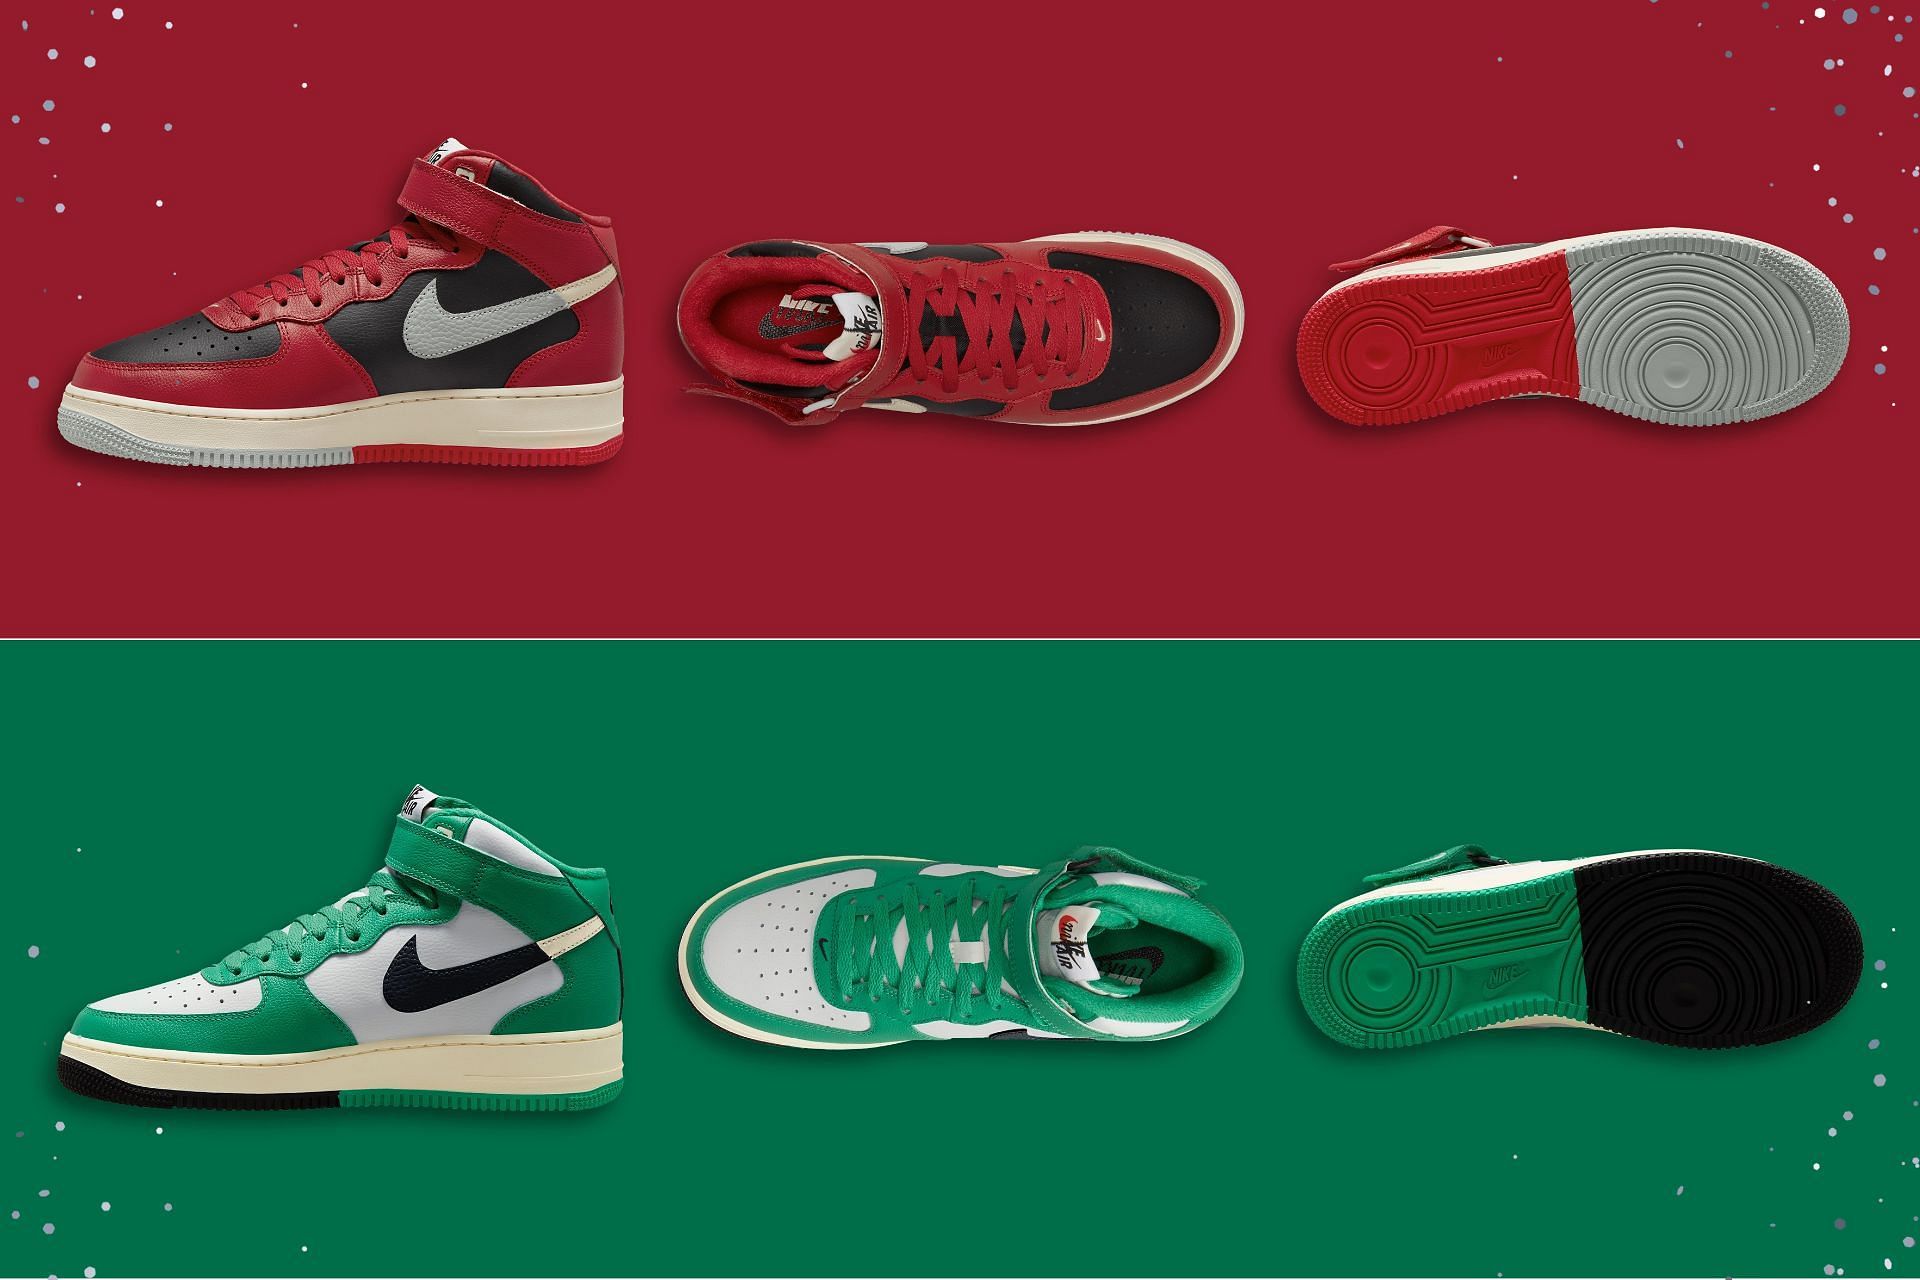 The upcoming Nike Air Force 1 Mid Split sneaker pack features &quot;Bred&quot; and &quot;Green&quot; color schemes (Image via Sportskeeda)